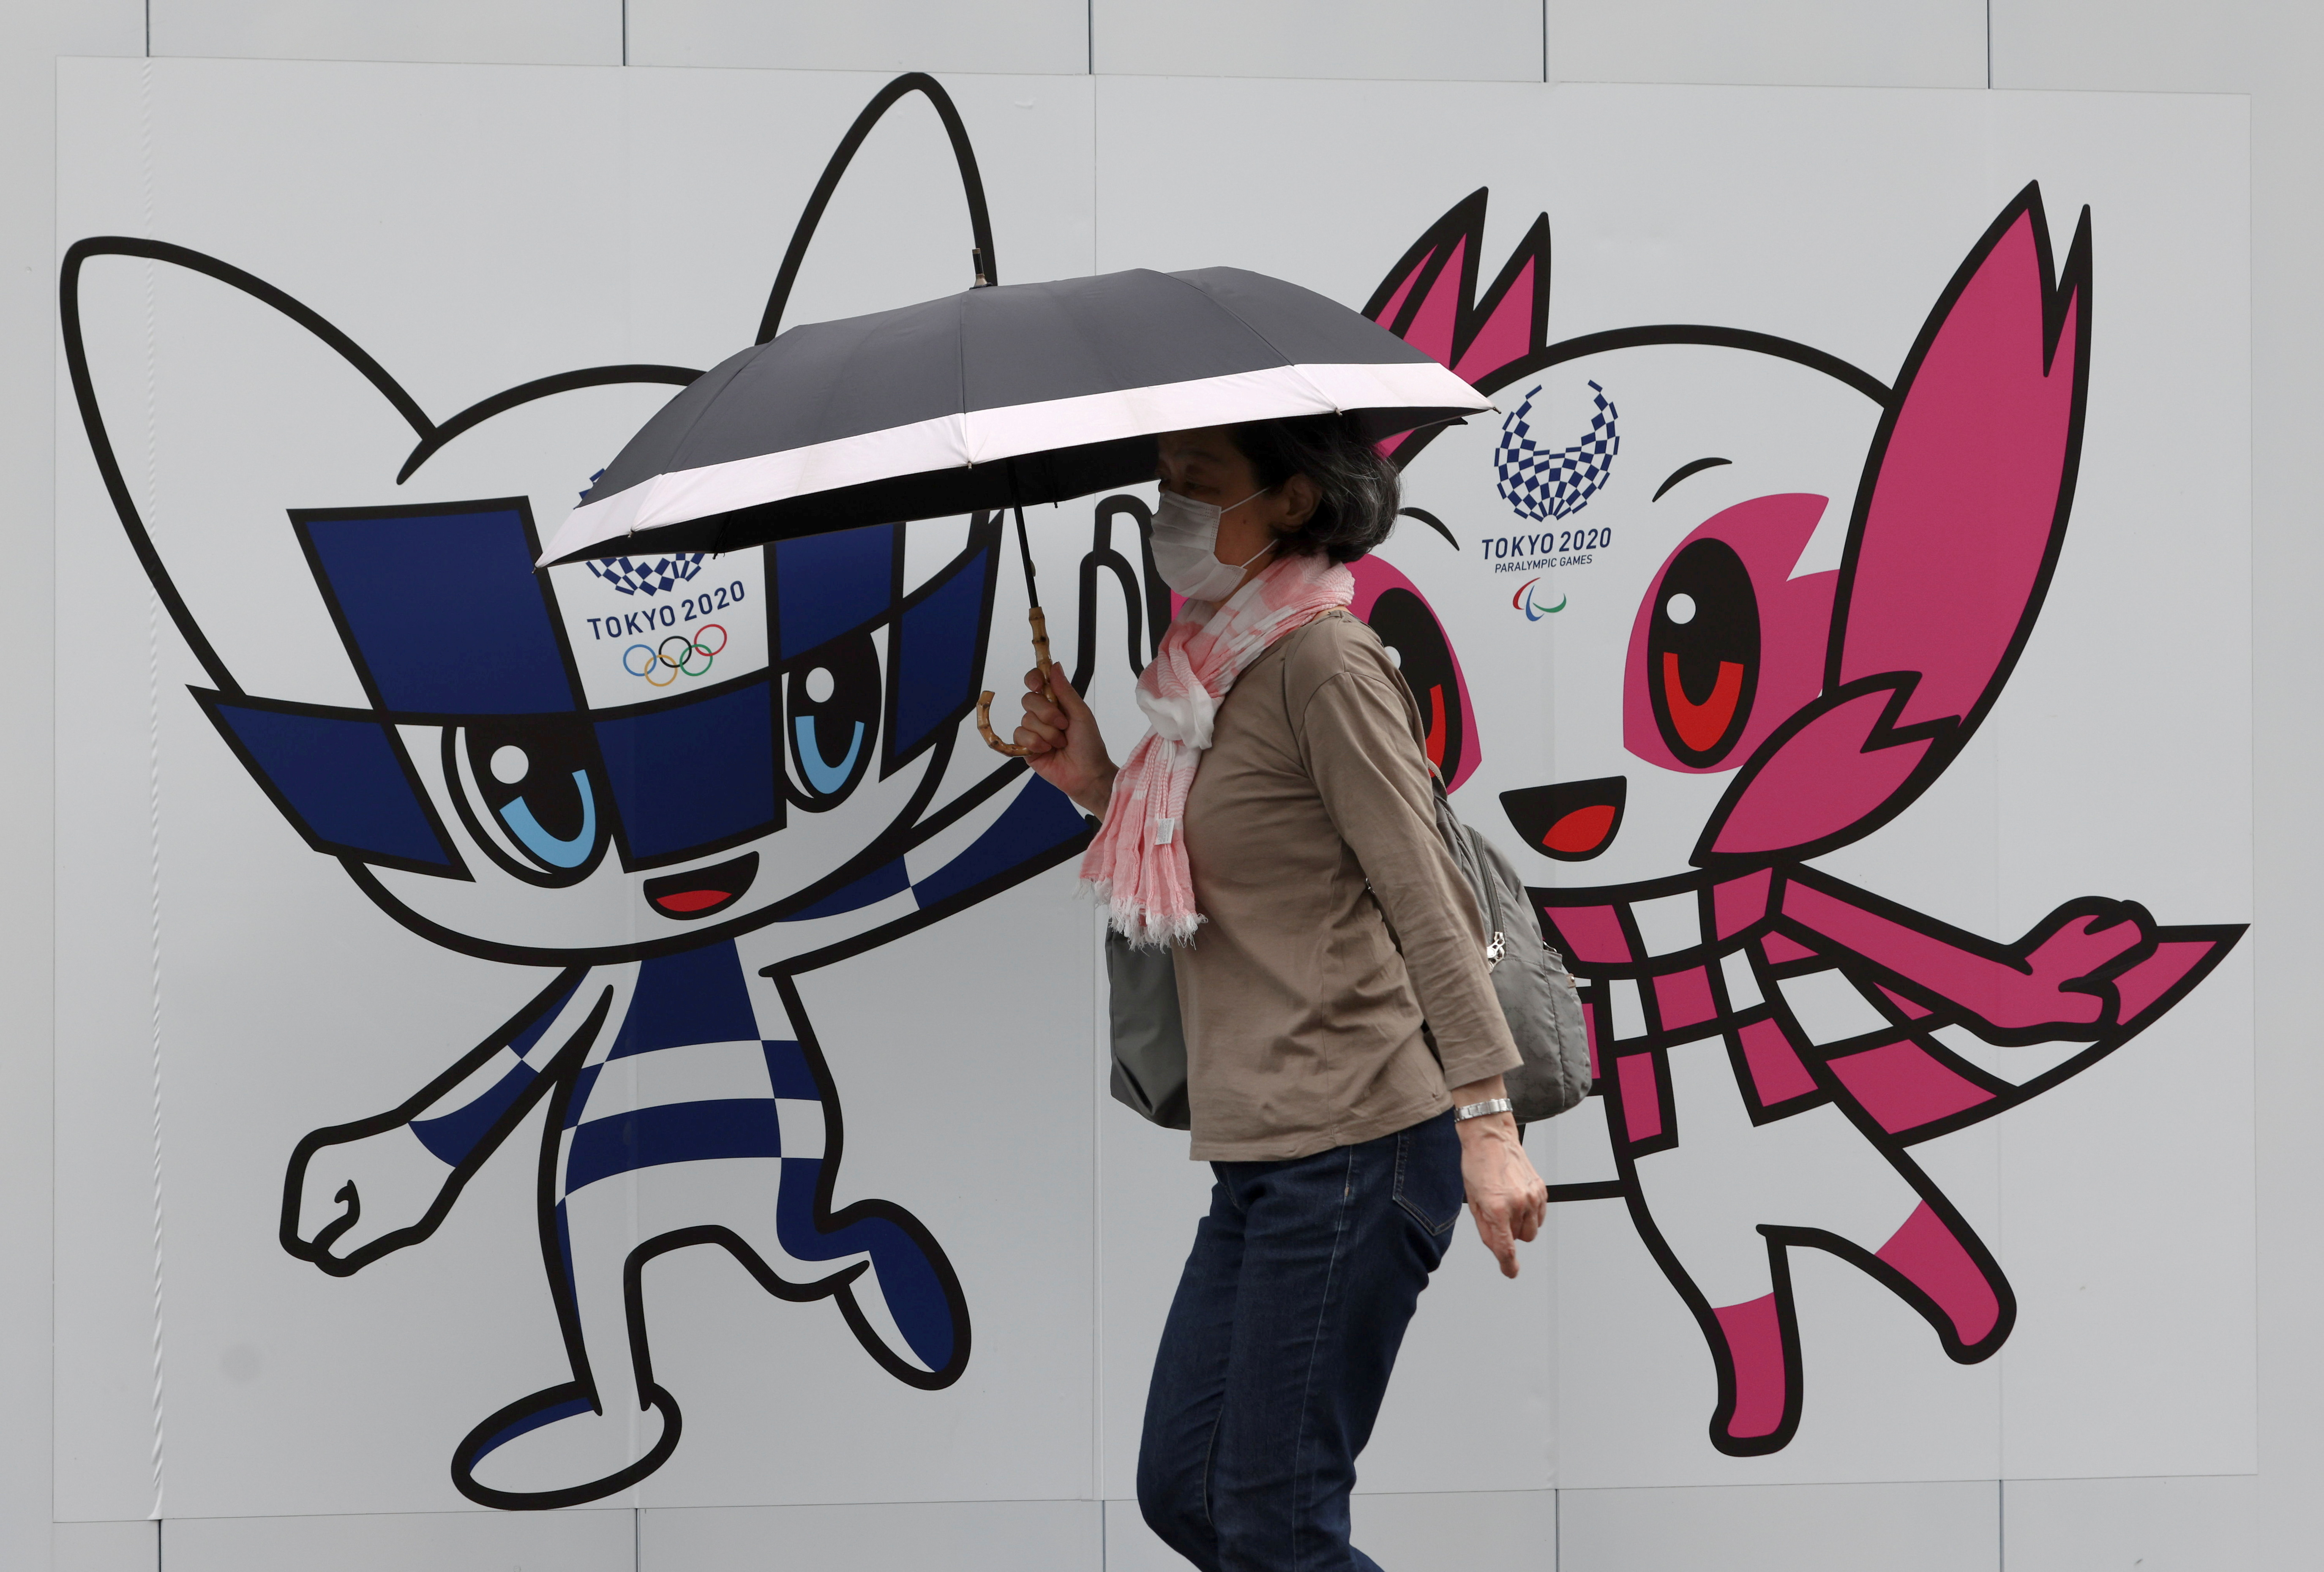 A woman wearing a protective face mask walks in front of a wall decoration featuring Tokyo 2020 Olympic Games mascot Miraitowa and Paralympics mascot Someity in Tokyo